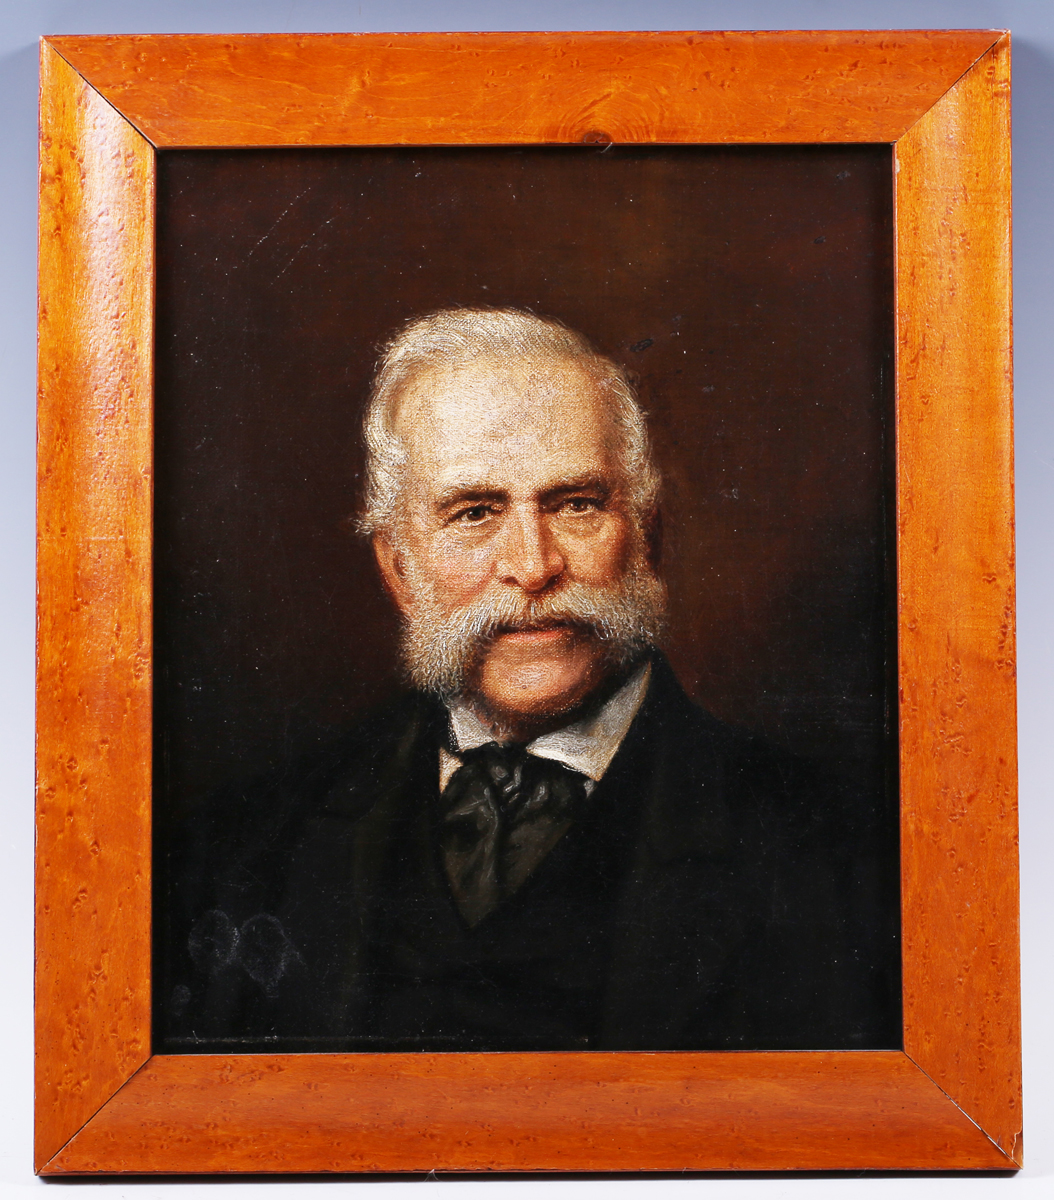 Continental School - Half Length Portrait of a Gentleman with a Handlebar Moustache, wearing a Black - Image 6 of 6